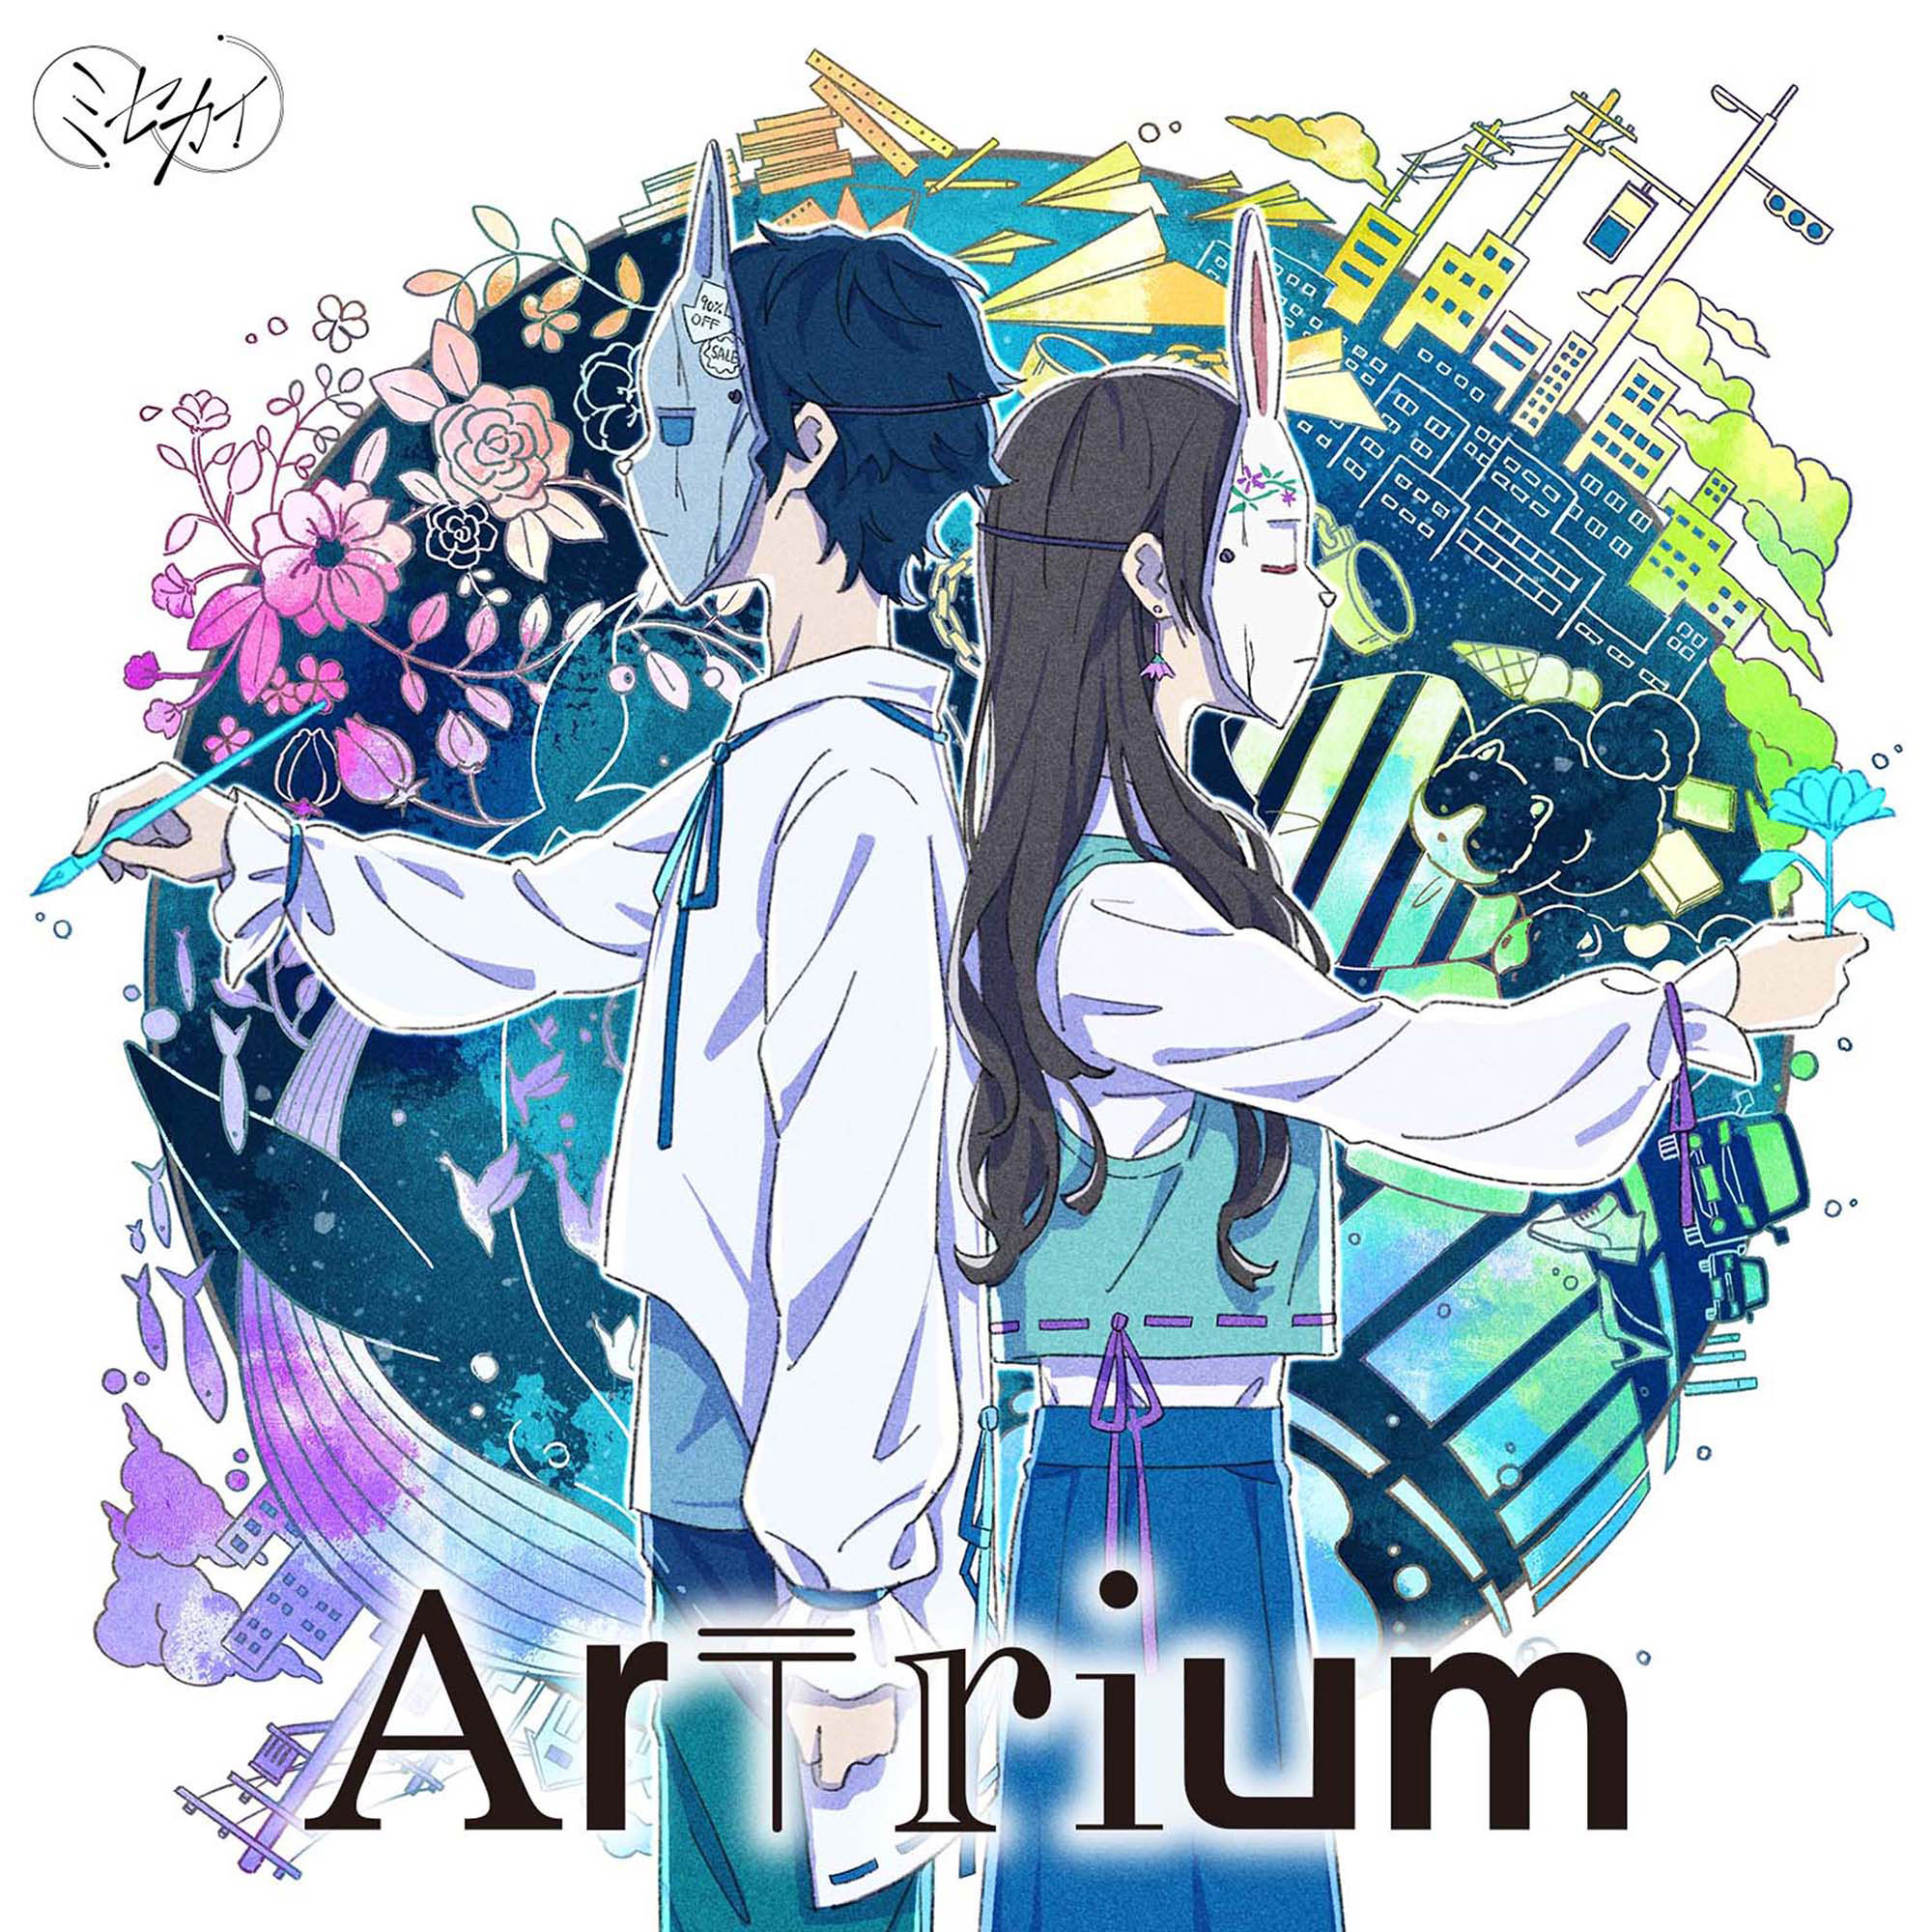 Misekai ”Artrium” Limited Edition (CD+DVD) Release on February 7th, 2024